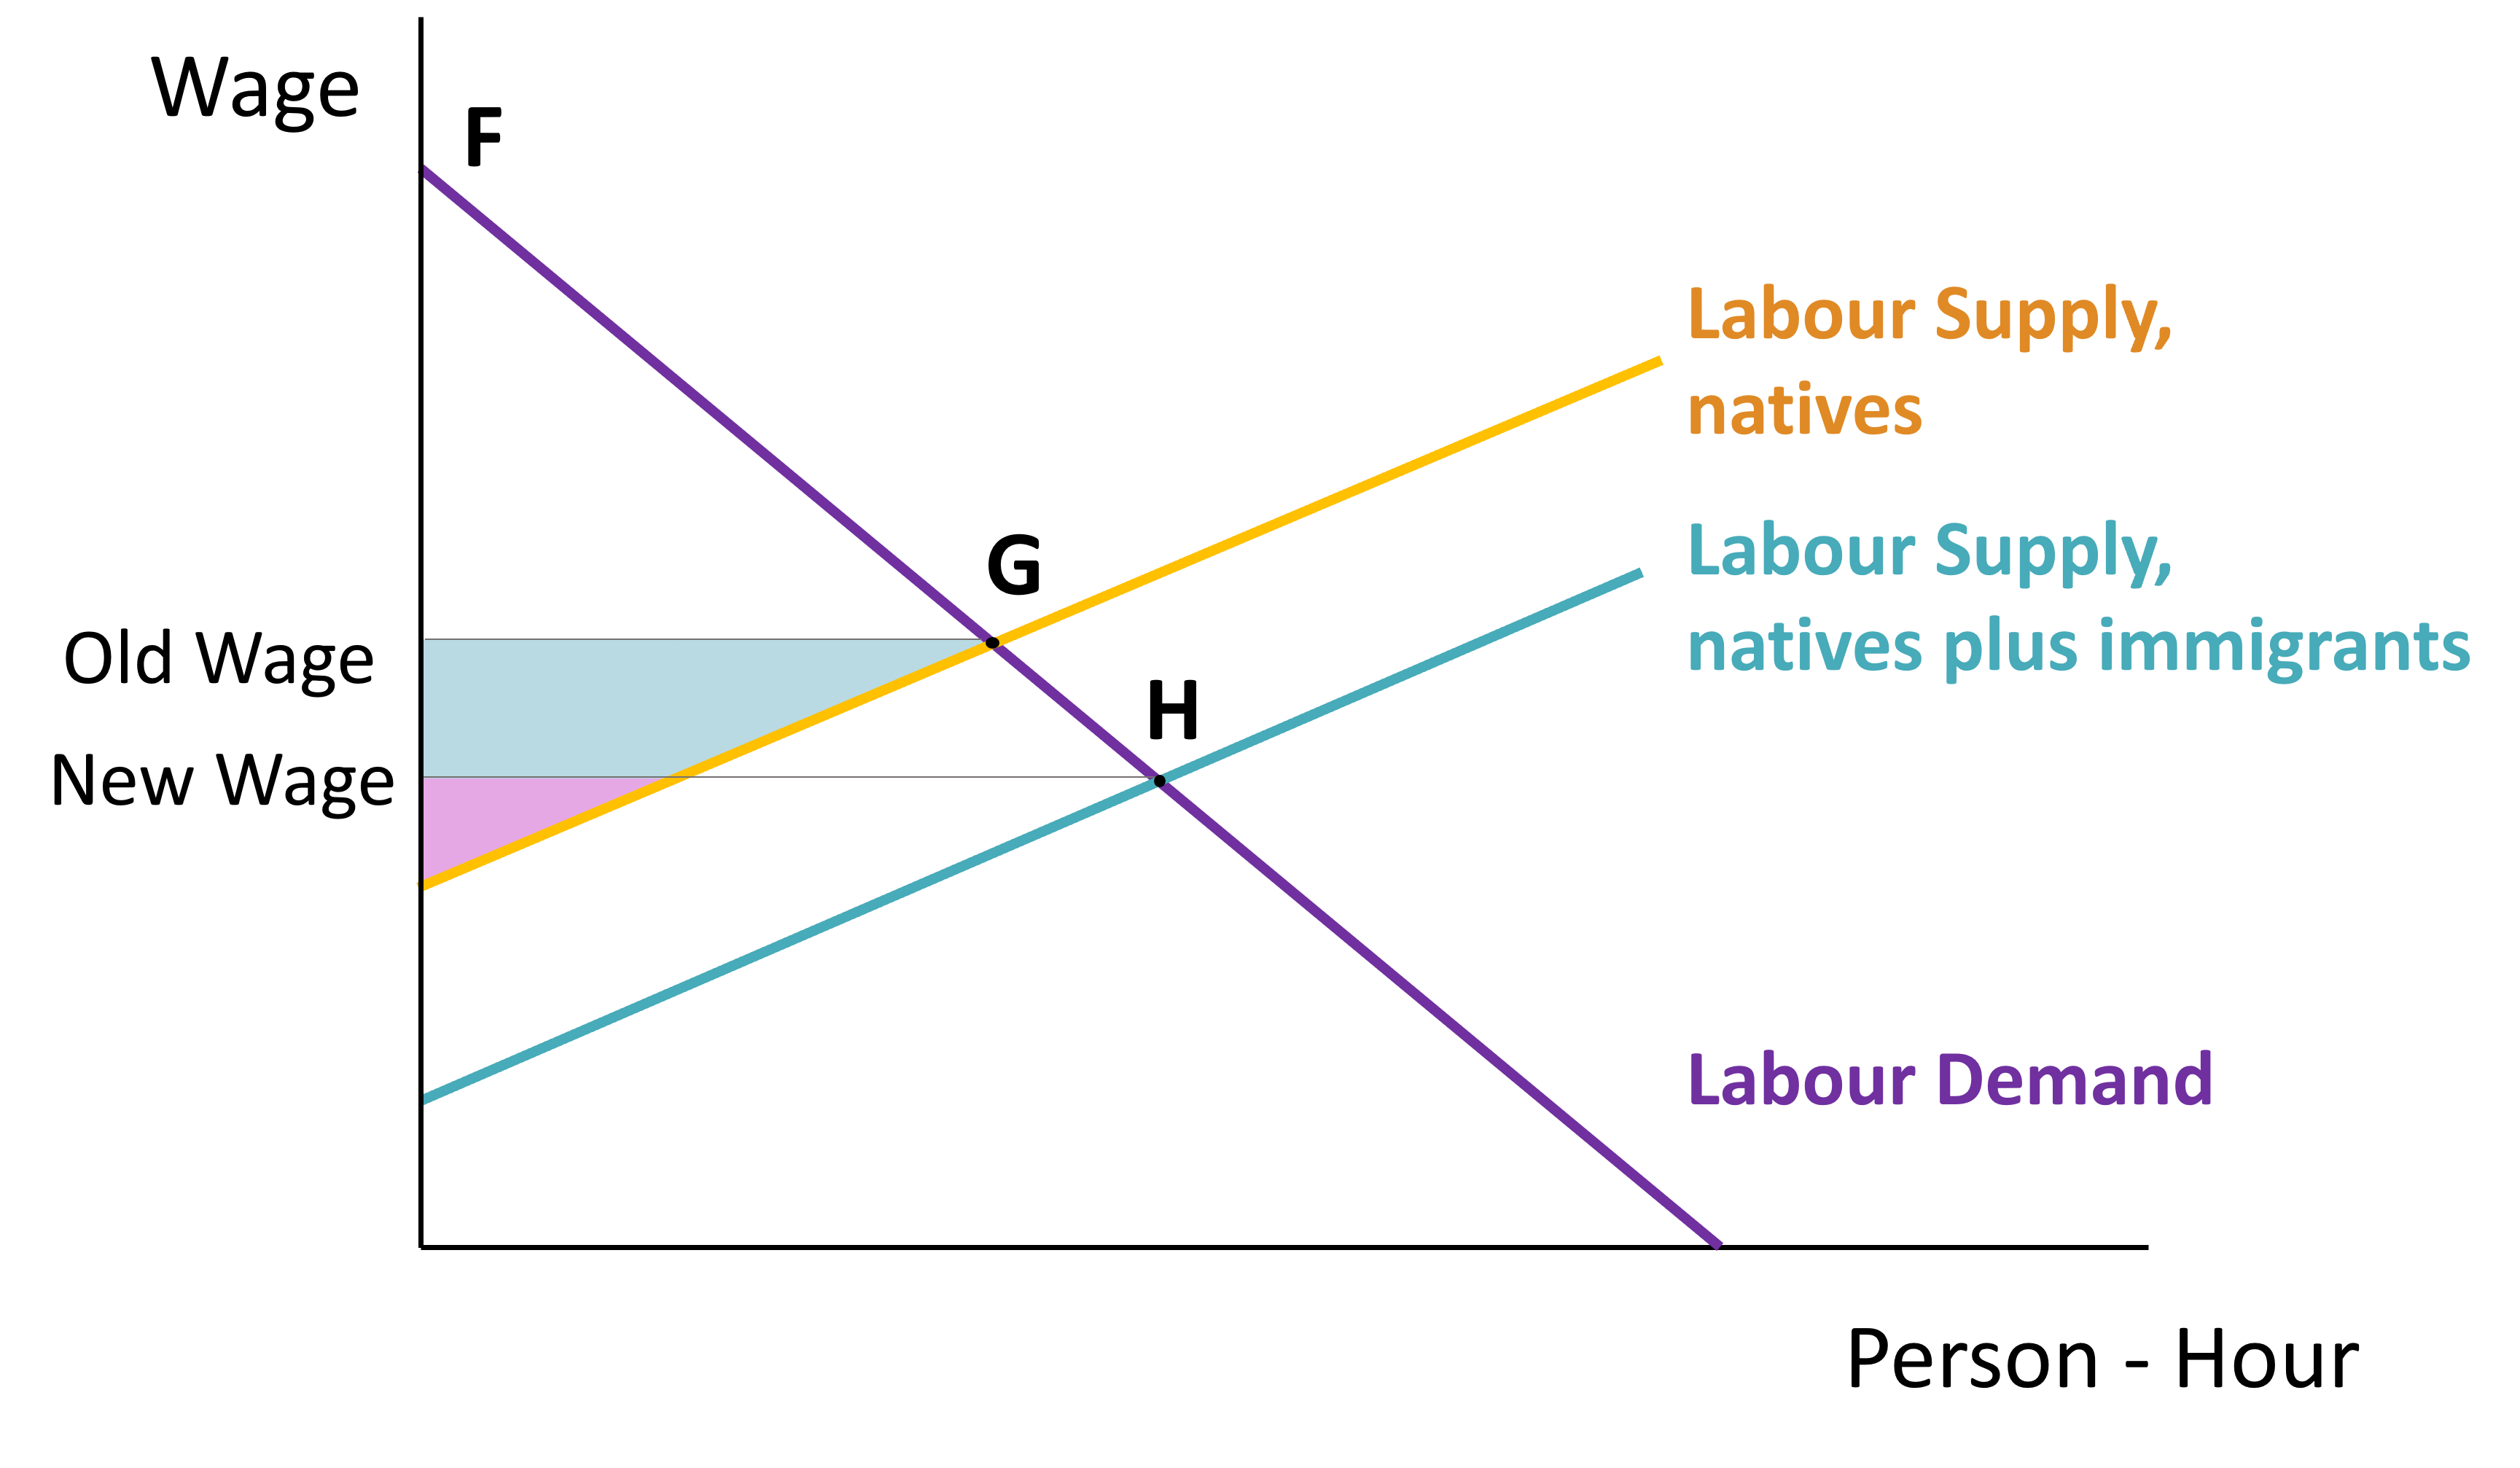 Figure 20-1 has the Wage on the vertical axis and Person Hours on the horizontal axis. There is a purple downward-sloping line that represents the Labour Demand of Employers. This is intersected at "G" by the upward-sloping yellow line representing native workers' Labour Supply. The purple Labour Demand "curve" is also intersected by another (blue) Labour Supply line which is below the original Labour Supply line. The new Labour Supply line represents the labour supply of native workers plus immigrants. It intersects the Demand Curve at point H, further down the Demand curve than point G. The height of point G is equal to the original wage. The height of point H is equal to the new wage once immigrants join the labour force. The new wage is lower than the original wage. The producer surplus, which measures net benefits to workers, is originally the triangle between G, the original wage, and the point where the native supply curve meets the y-axis. After the immigrants arrive, producer surplus is the bottom part of that triangle, cut off by the line between H and the new wage.